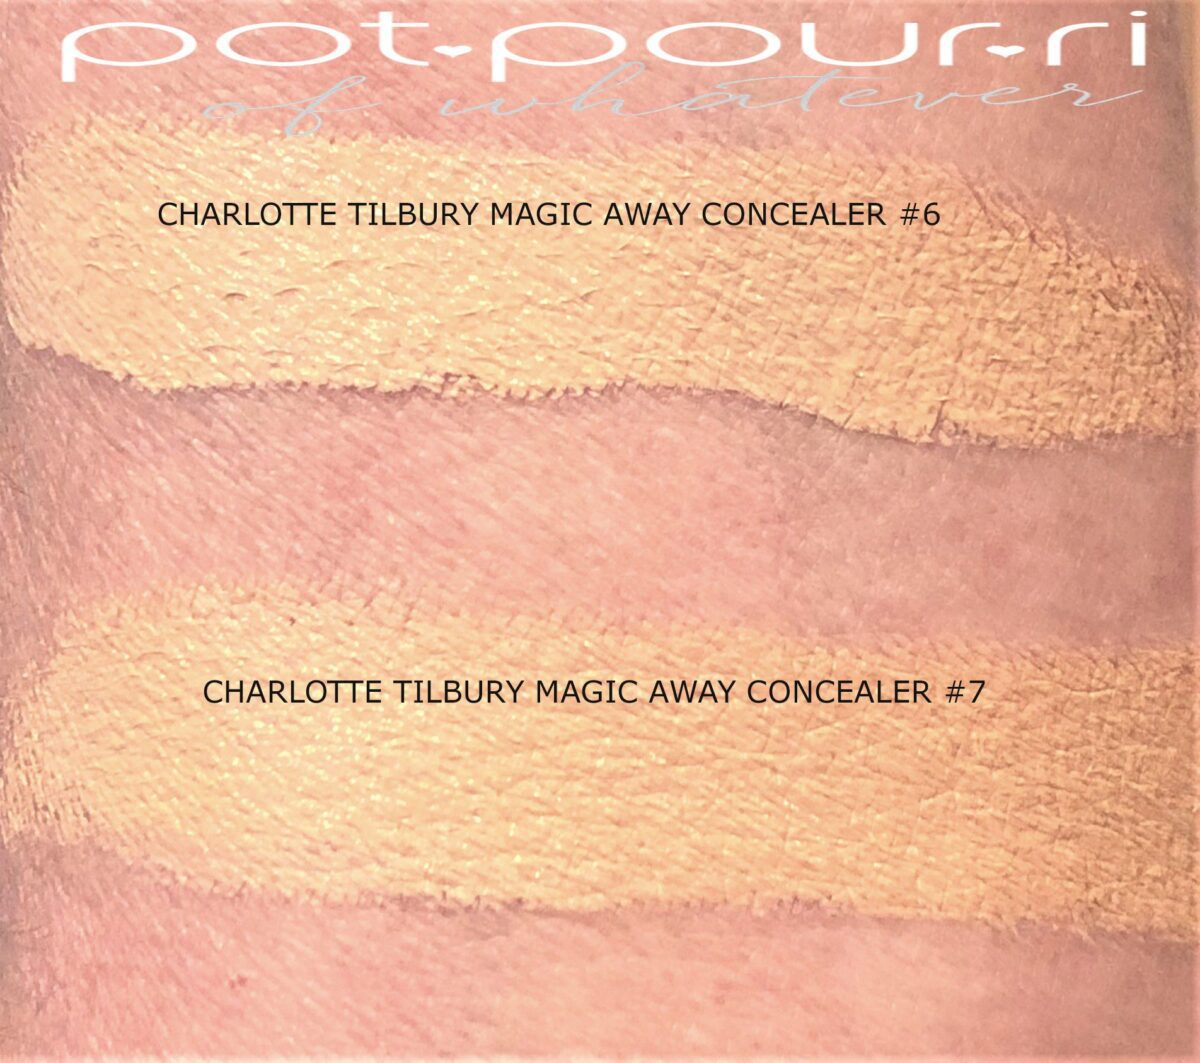 MORE SWATCHES FOR CHARLOTTE TILBURY MAGIC AWAY CONCEALER